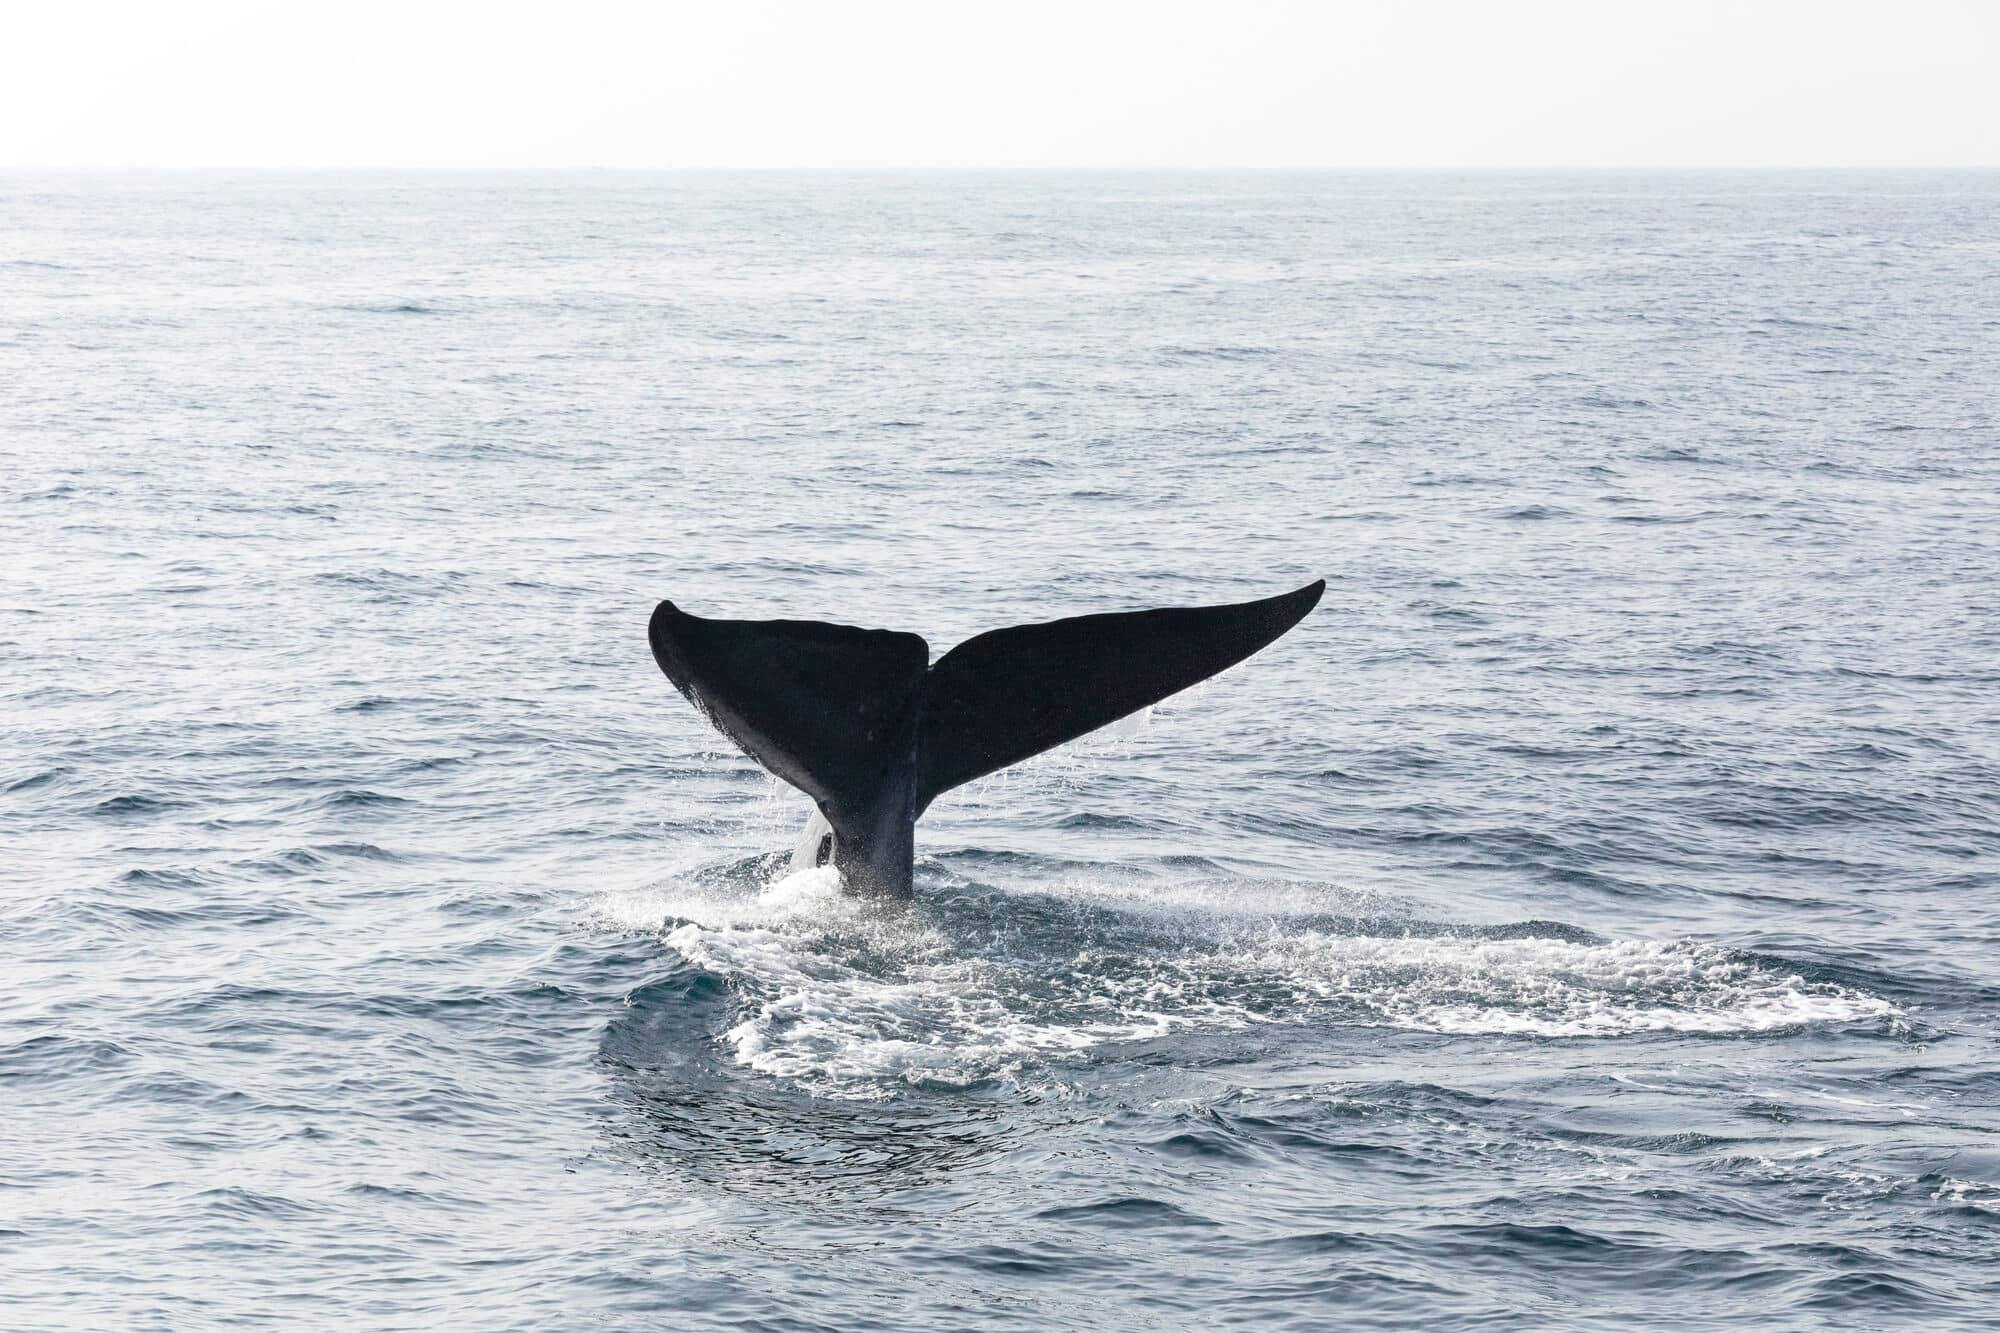 Whale Watching Tour with Los Haitises & Bacardi Island